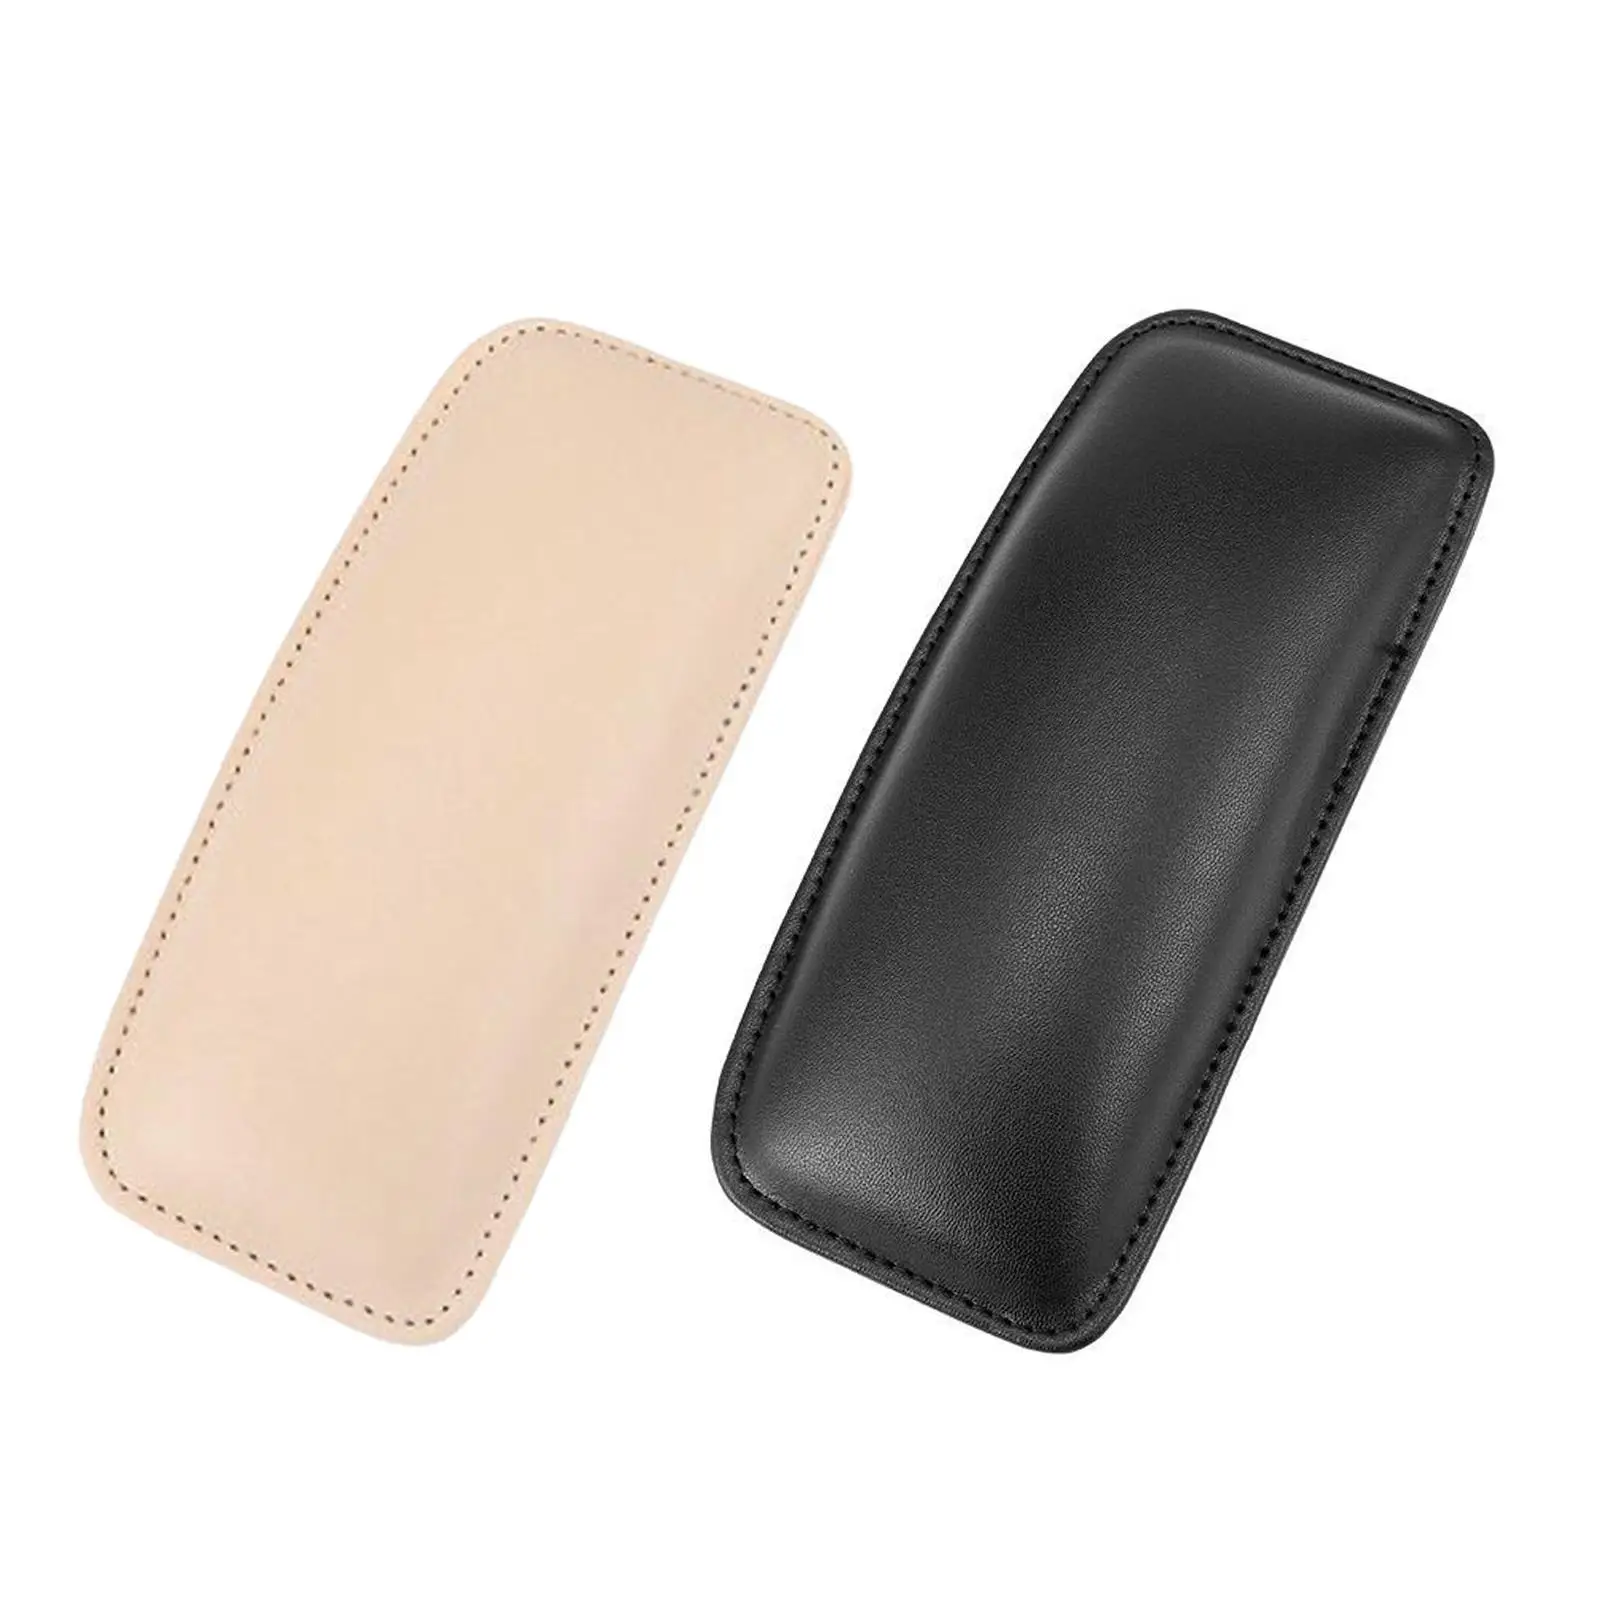 Center Console Knee Pad Thigh Support 22x8cm Comfort Pillow Car Door Armrest Elbow Pad PU Leather for Car Automotive Truck